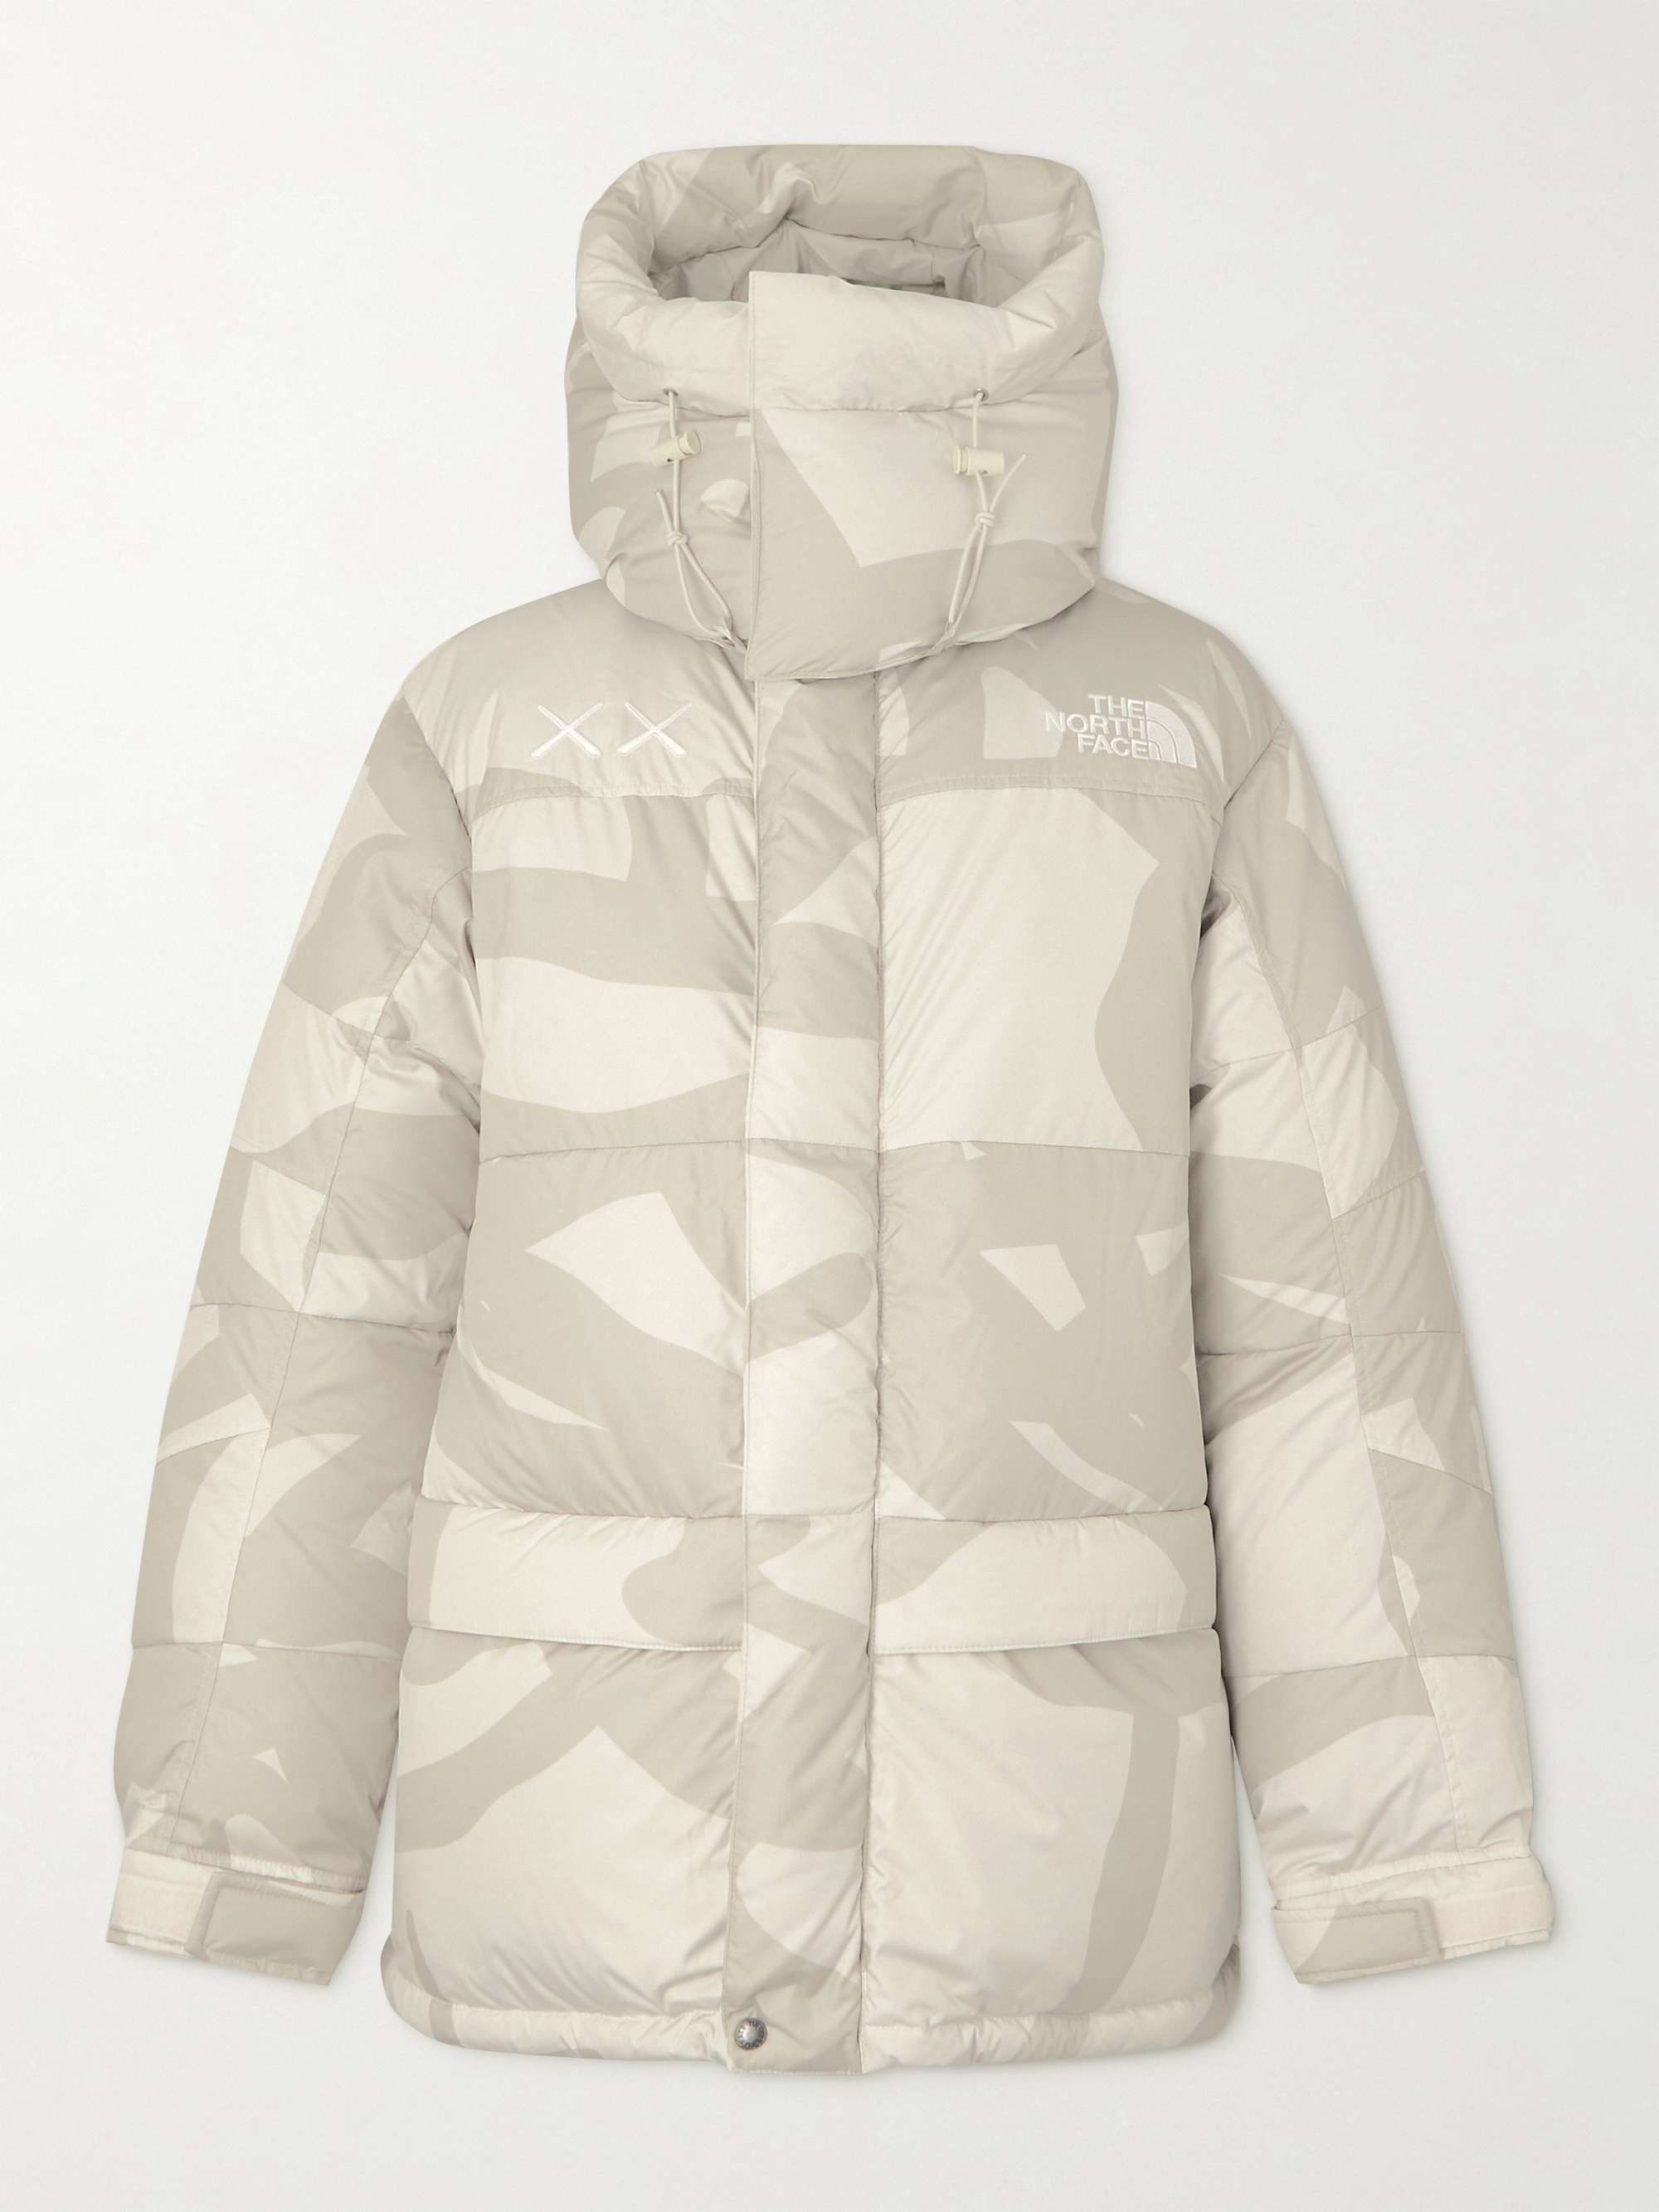 THE NORTH FACE + XX KAWS Retro 1994 Himalayan Quilted Shell Hooded 